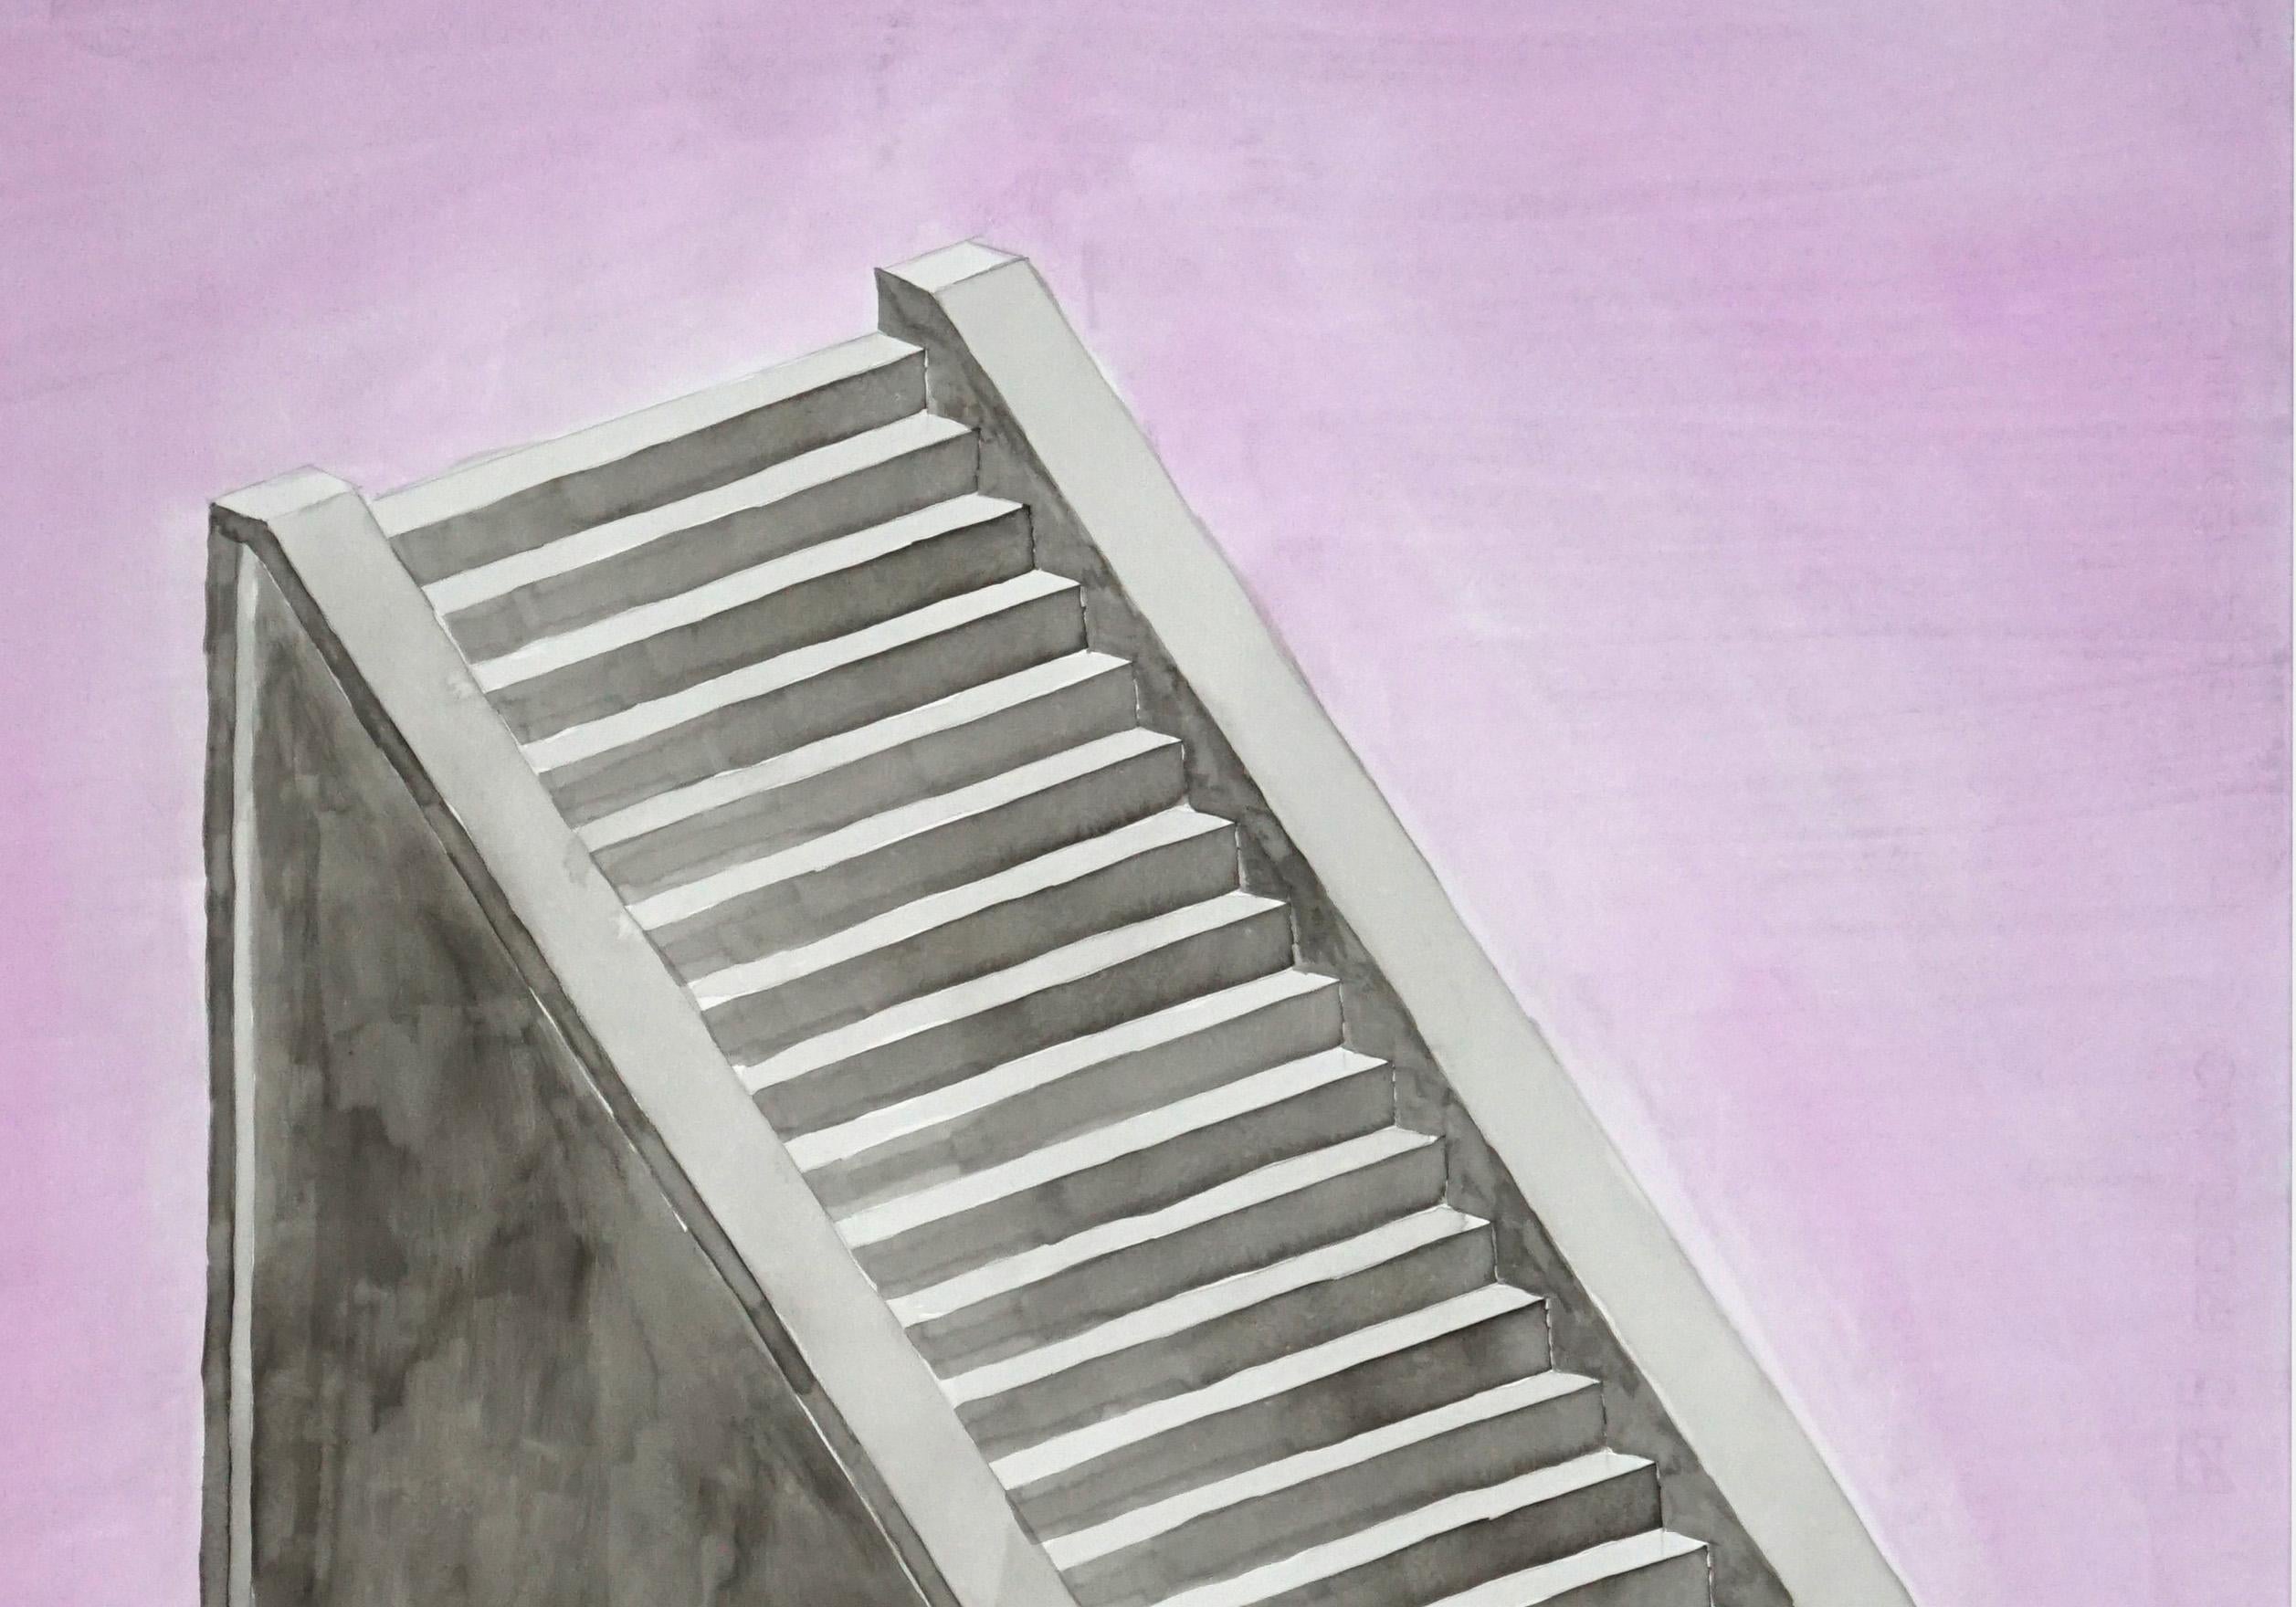 Lilac Mayan Staircase, Minimal Architecture Watercolor on Paper, Gray 100x70 cm  - Minimalist Art by Ryan Rivadeneyra